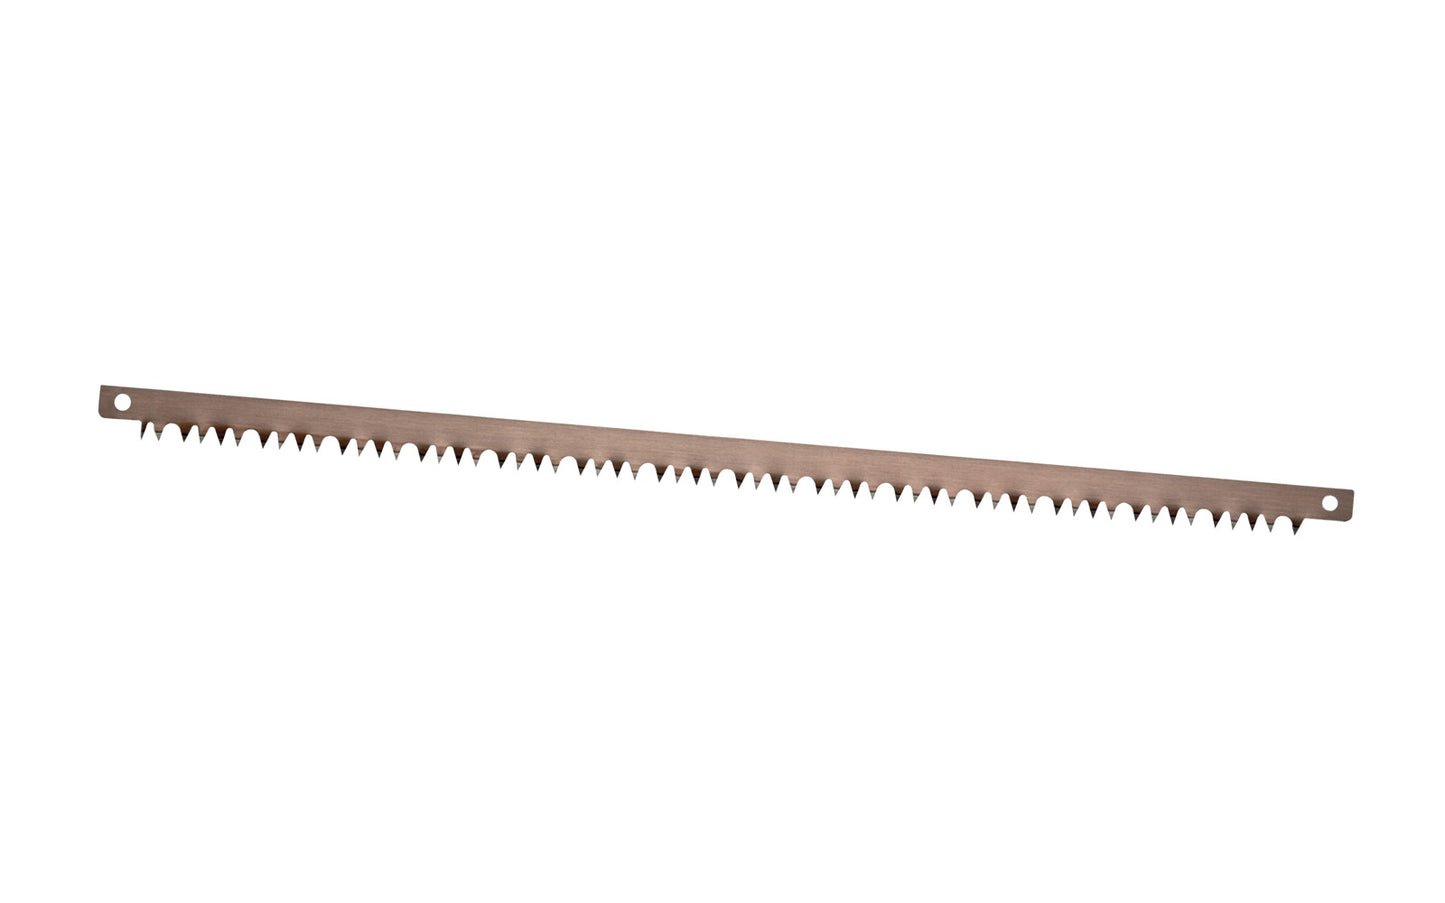 Bahco 14" Replacement Blade for Bowsaw - Model 333-5. Designed for Bahco 333 general purpose bow saw. Hardened & tempered high-quality steel. Easier cutting in dry seasoned wood from the peg teething. Hardened & tempered high-quality steel. Made in Italy ~ 7311518005849